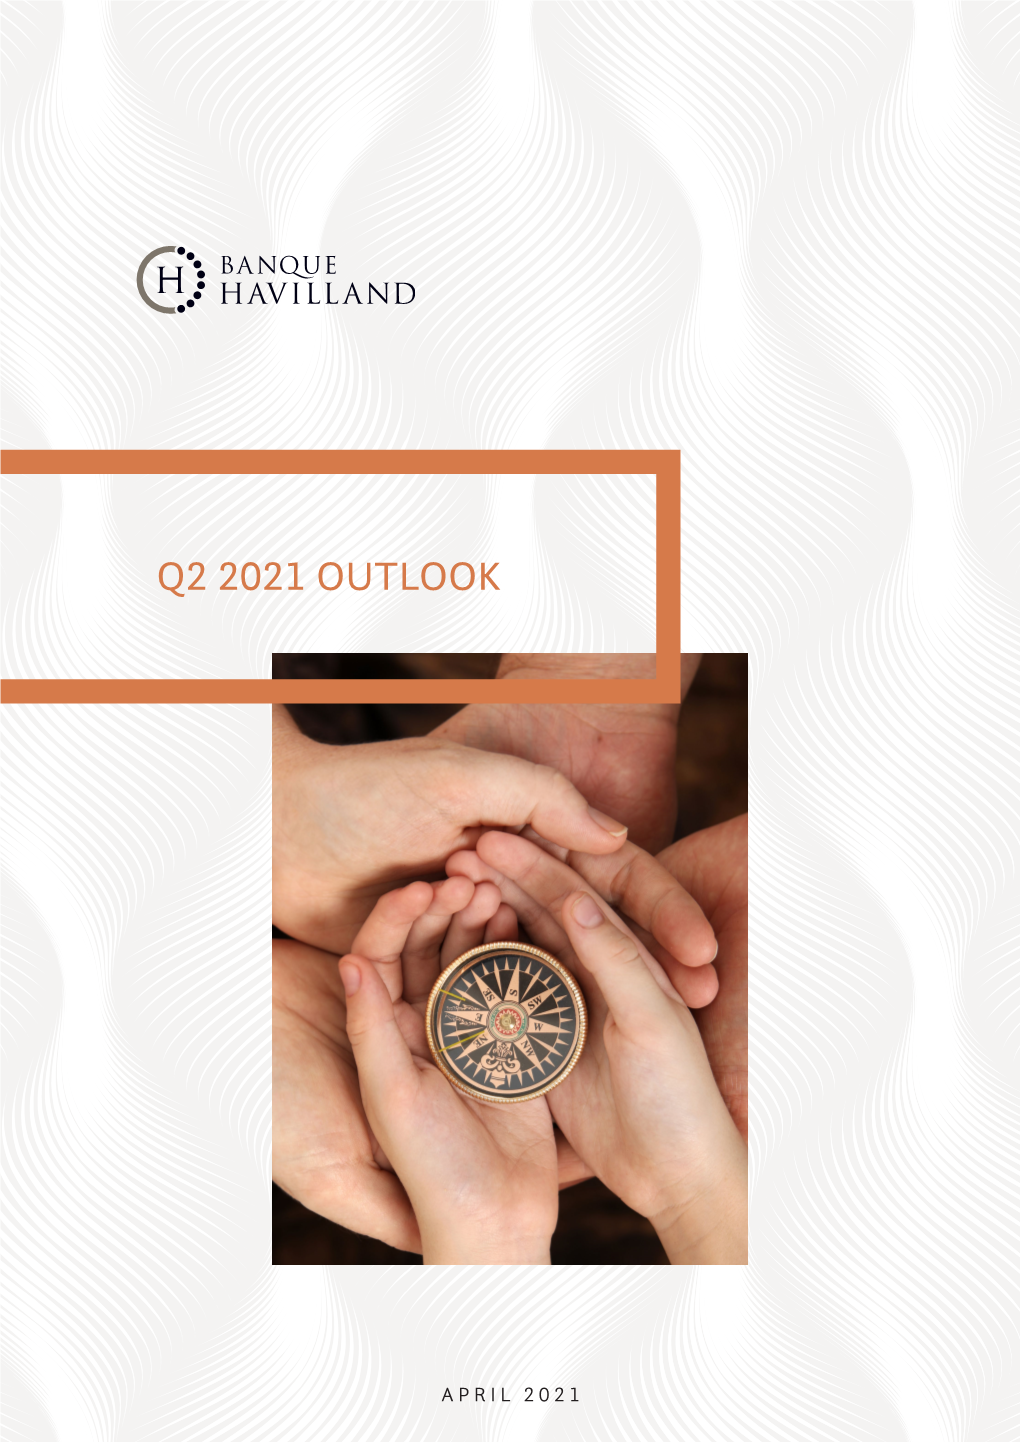 Q2 2021 Outlook